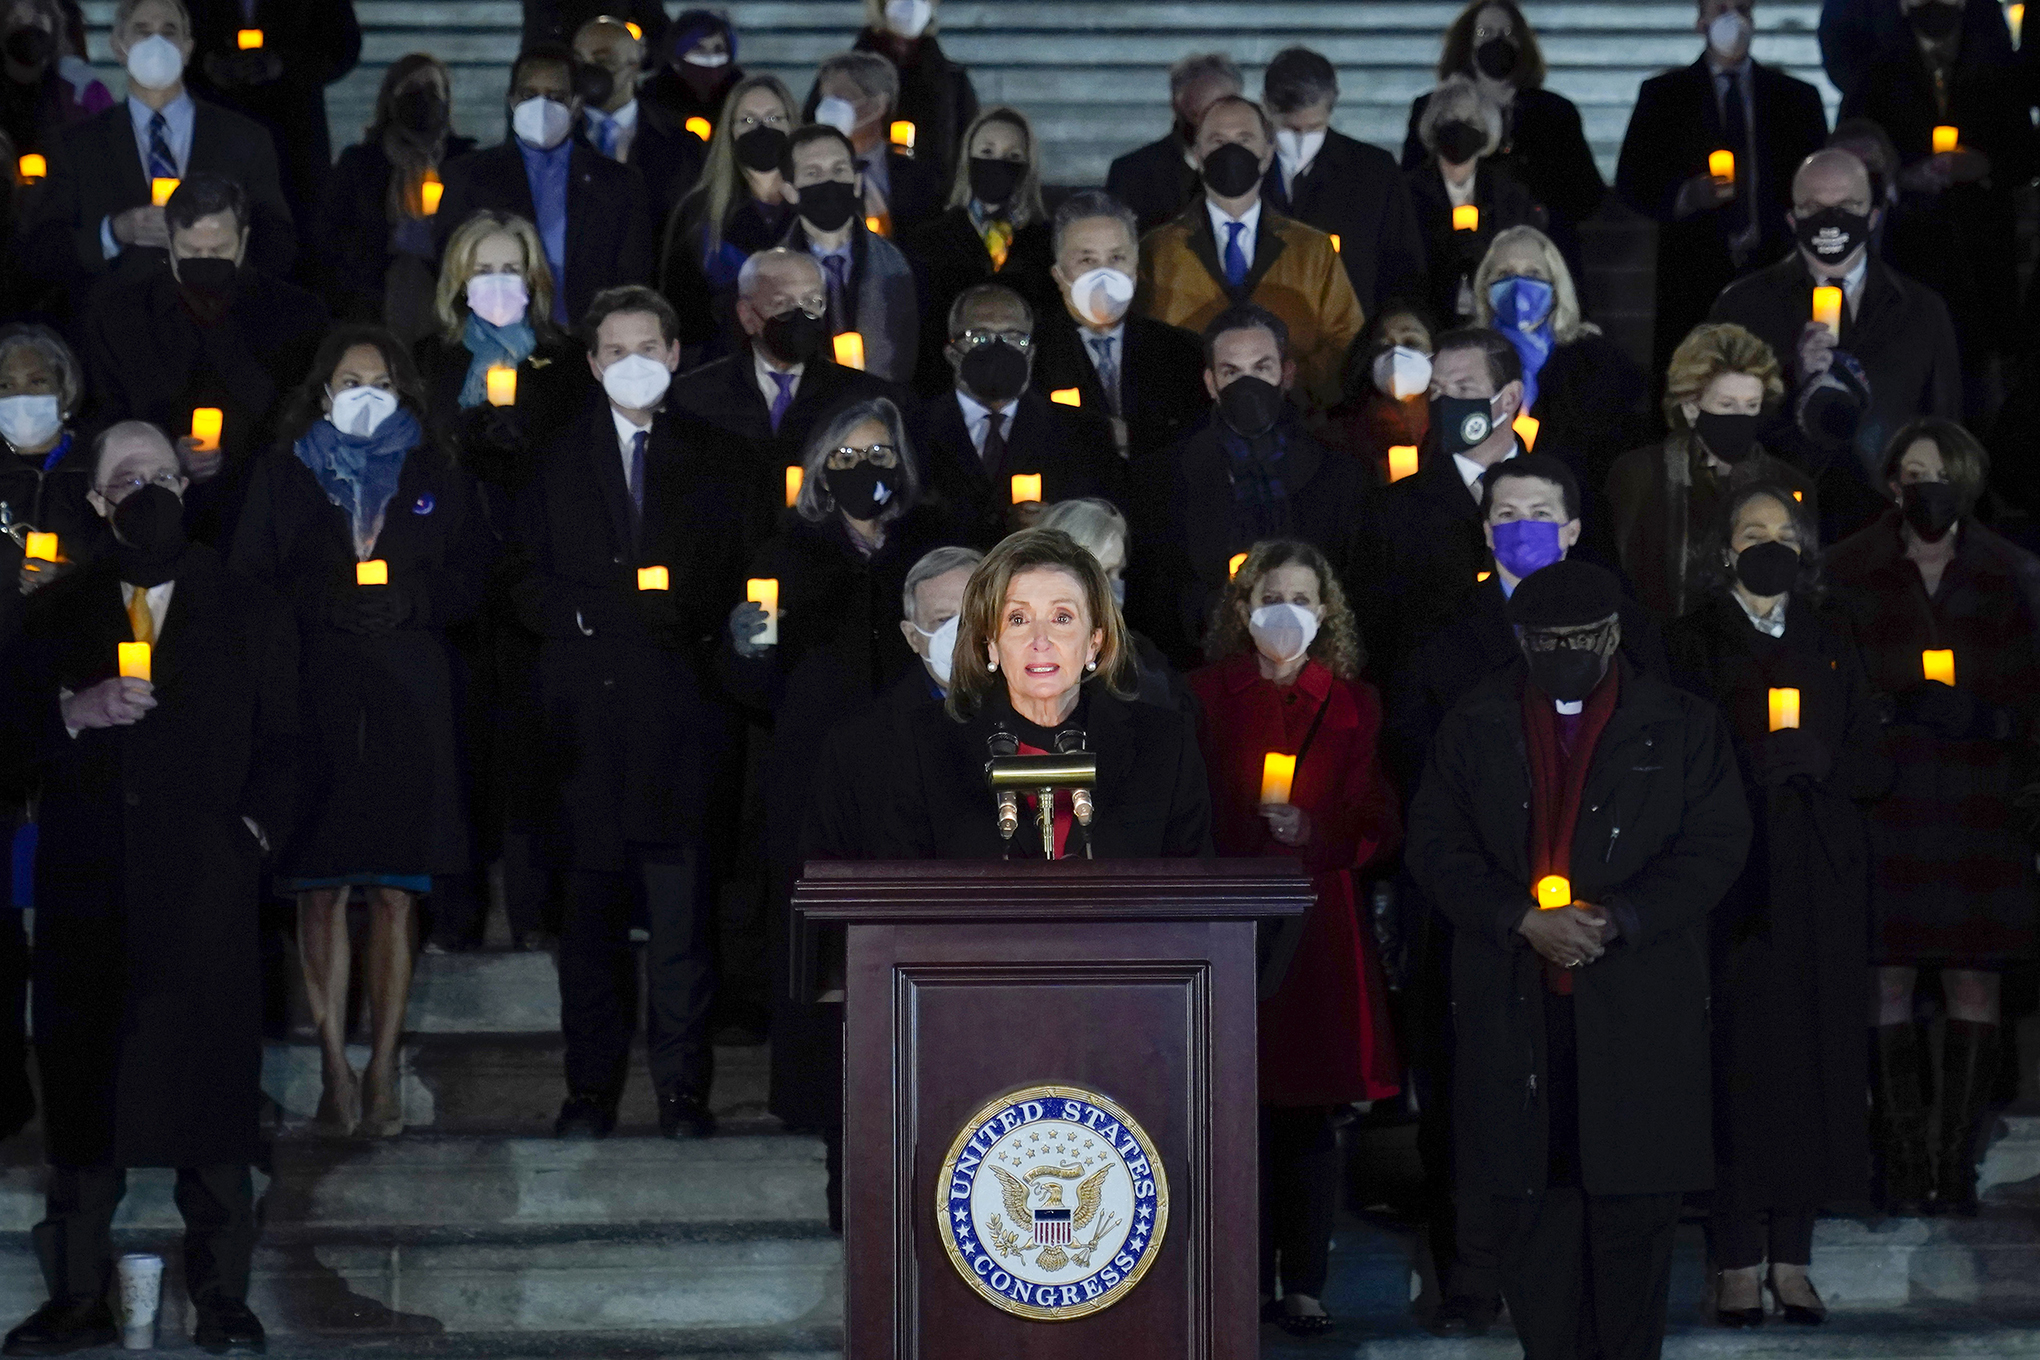 Nancy Pelosi speaks at a vigil on the anniversary of the Jan. 6 Capitol insurrection, with a crowd standing behind her and holding candles